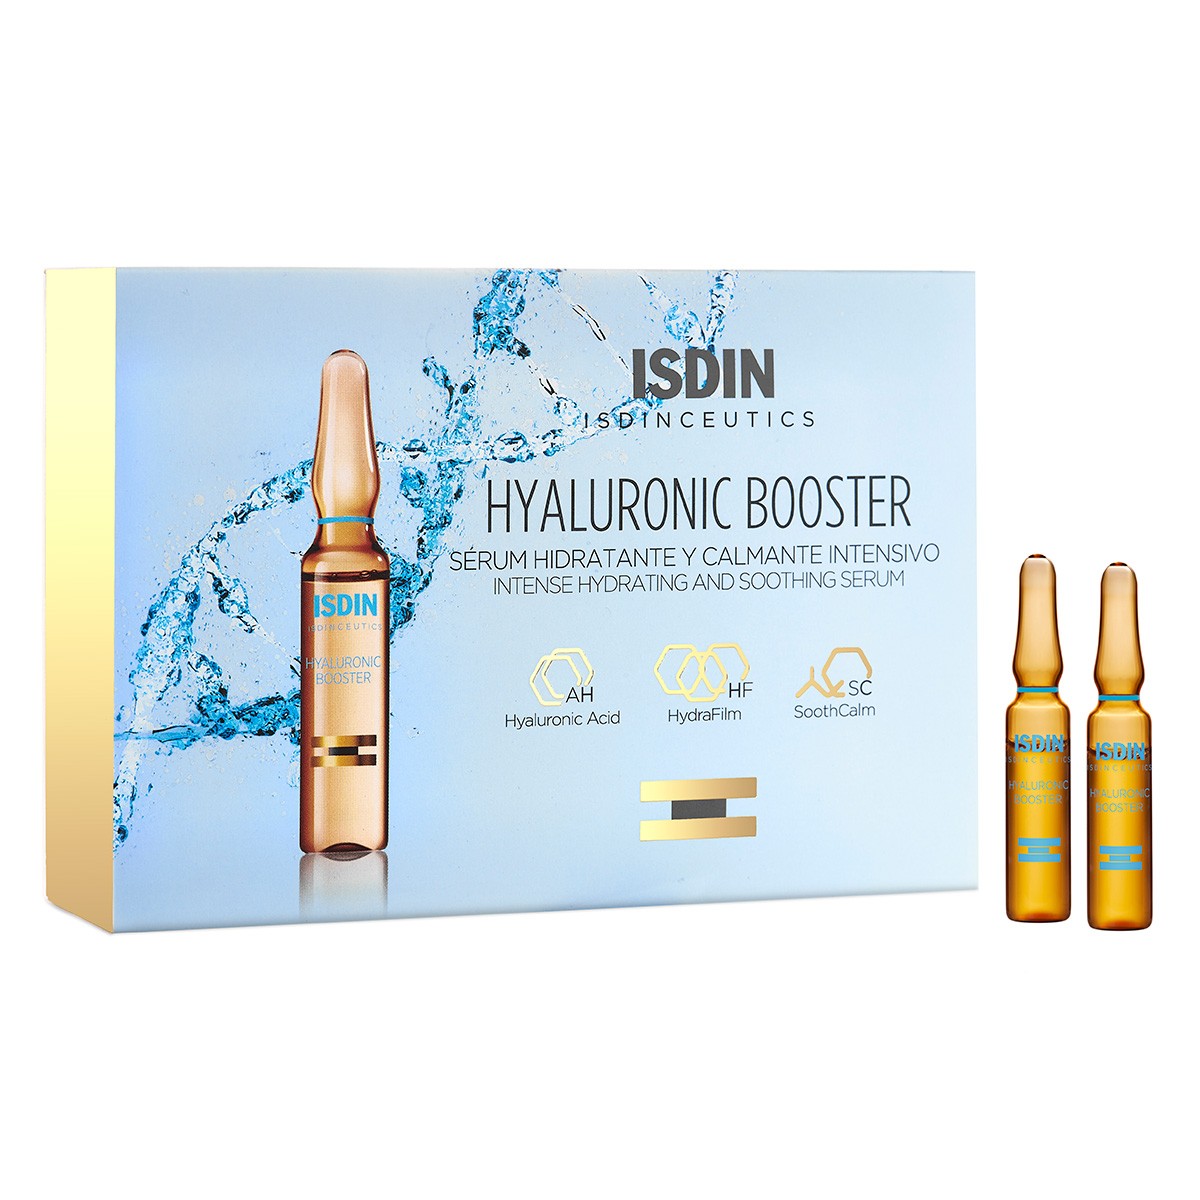 Isdinceutics hyaluronic booster 30 ampollas